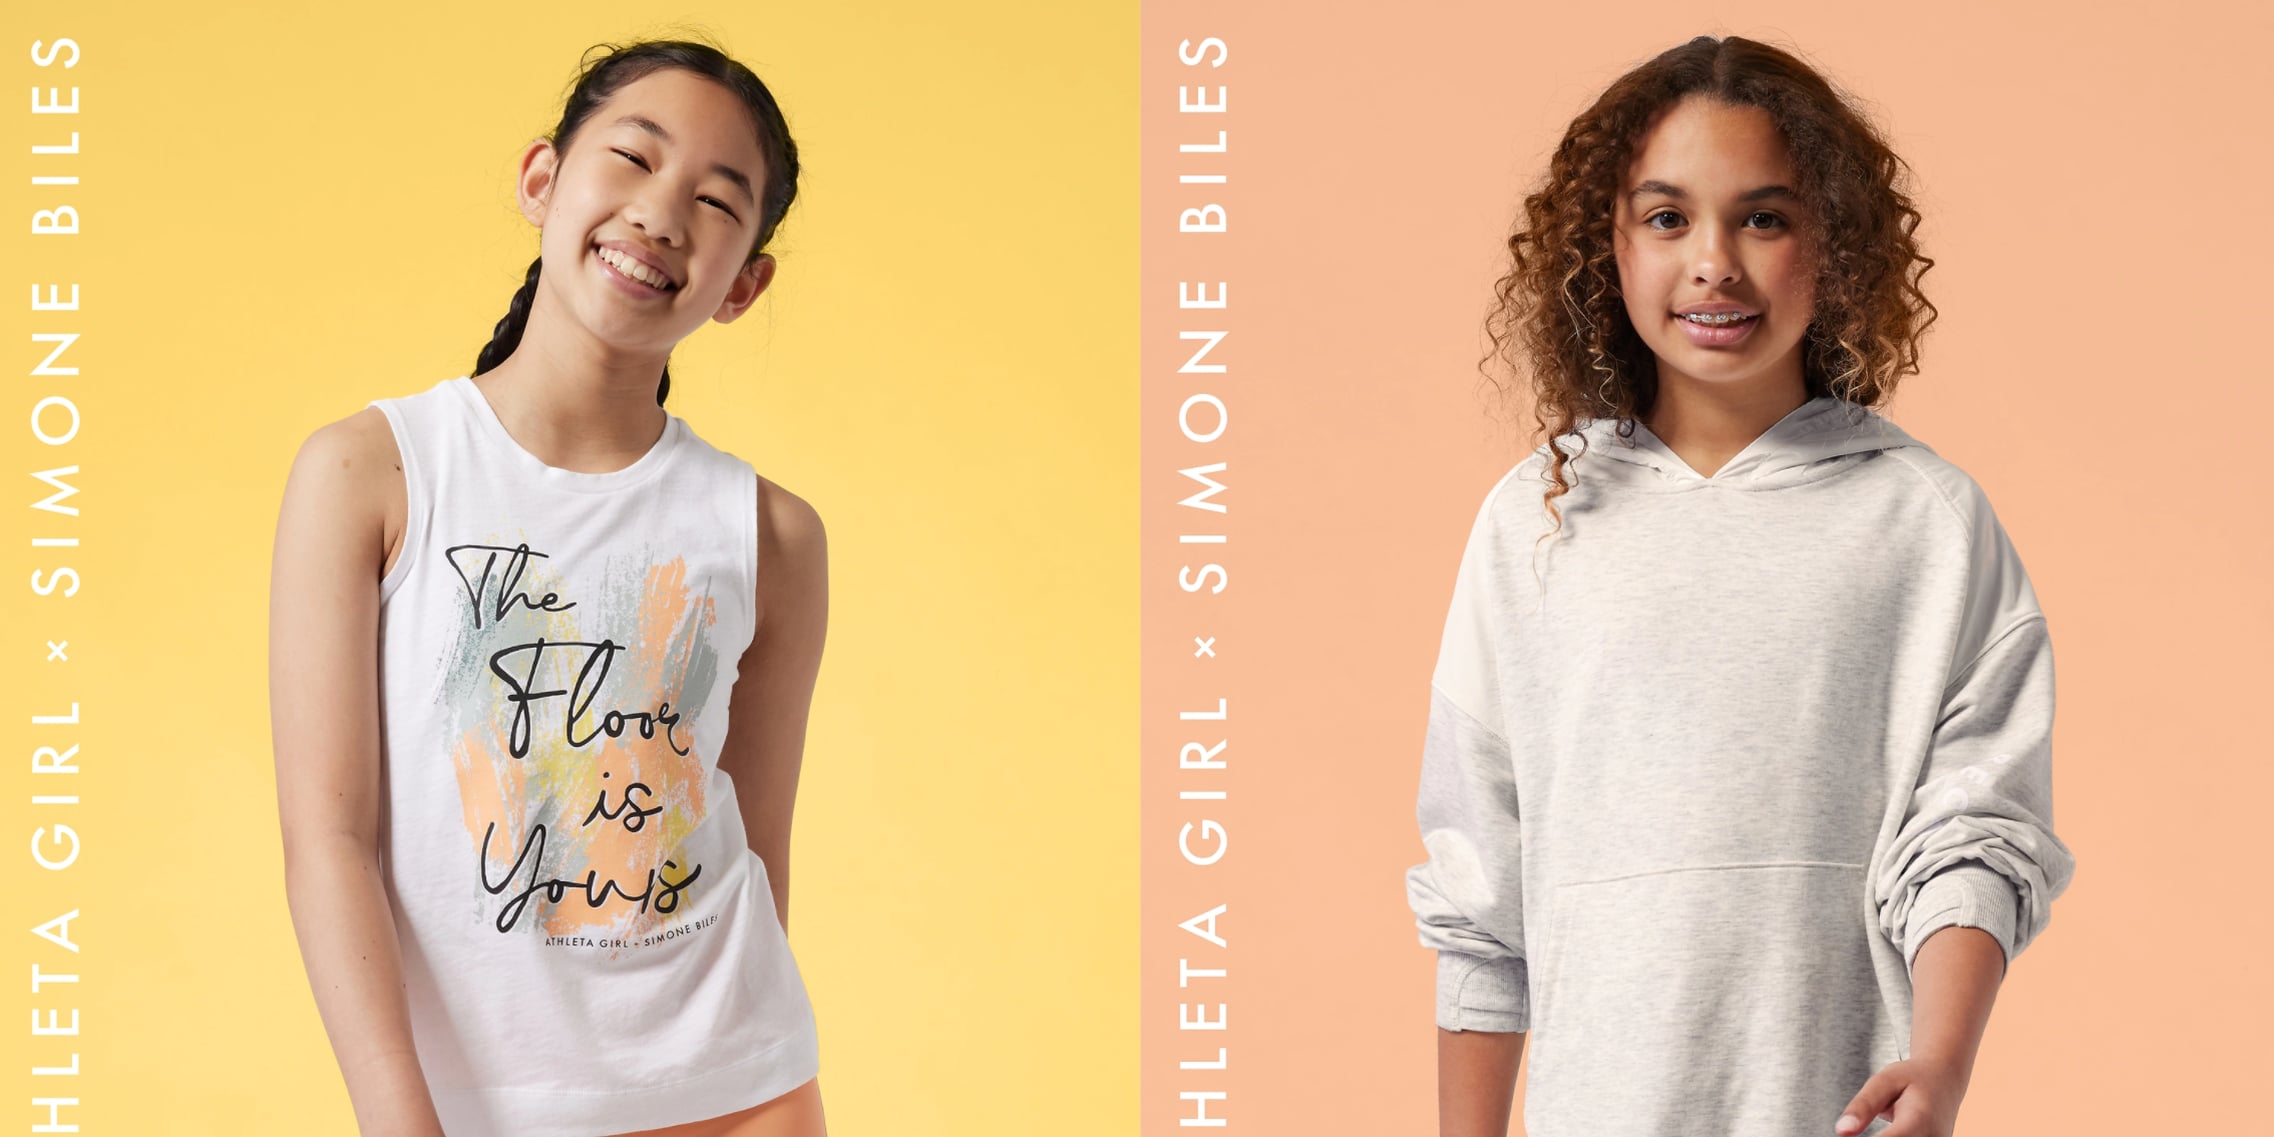 ATHLETA on X: We spent nearly two years working with girls to